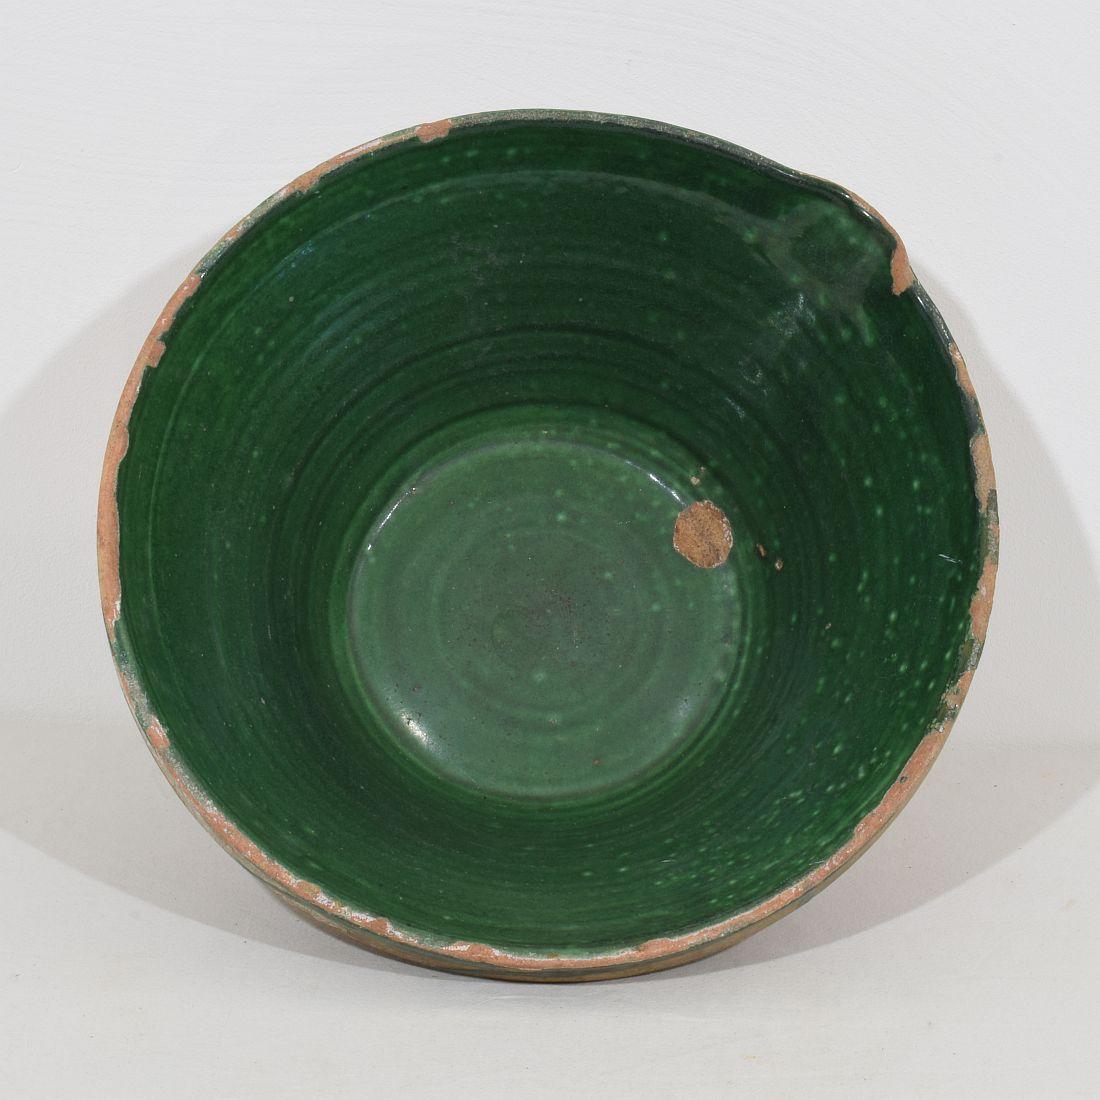 19th Century French Green Glazed Terracotta Dairy Bowl or Tian For Sale 2